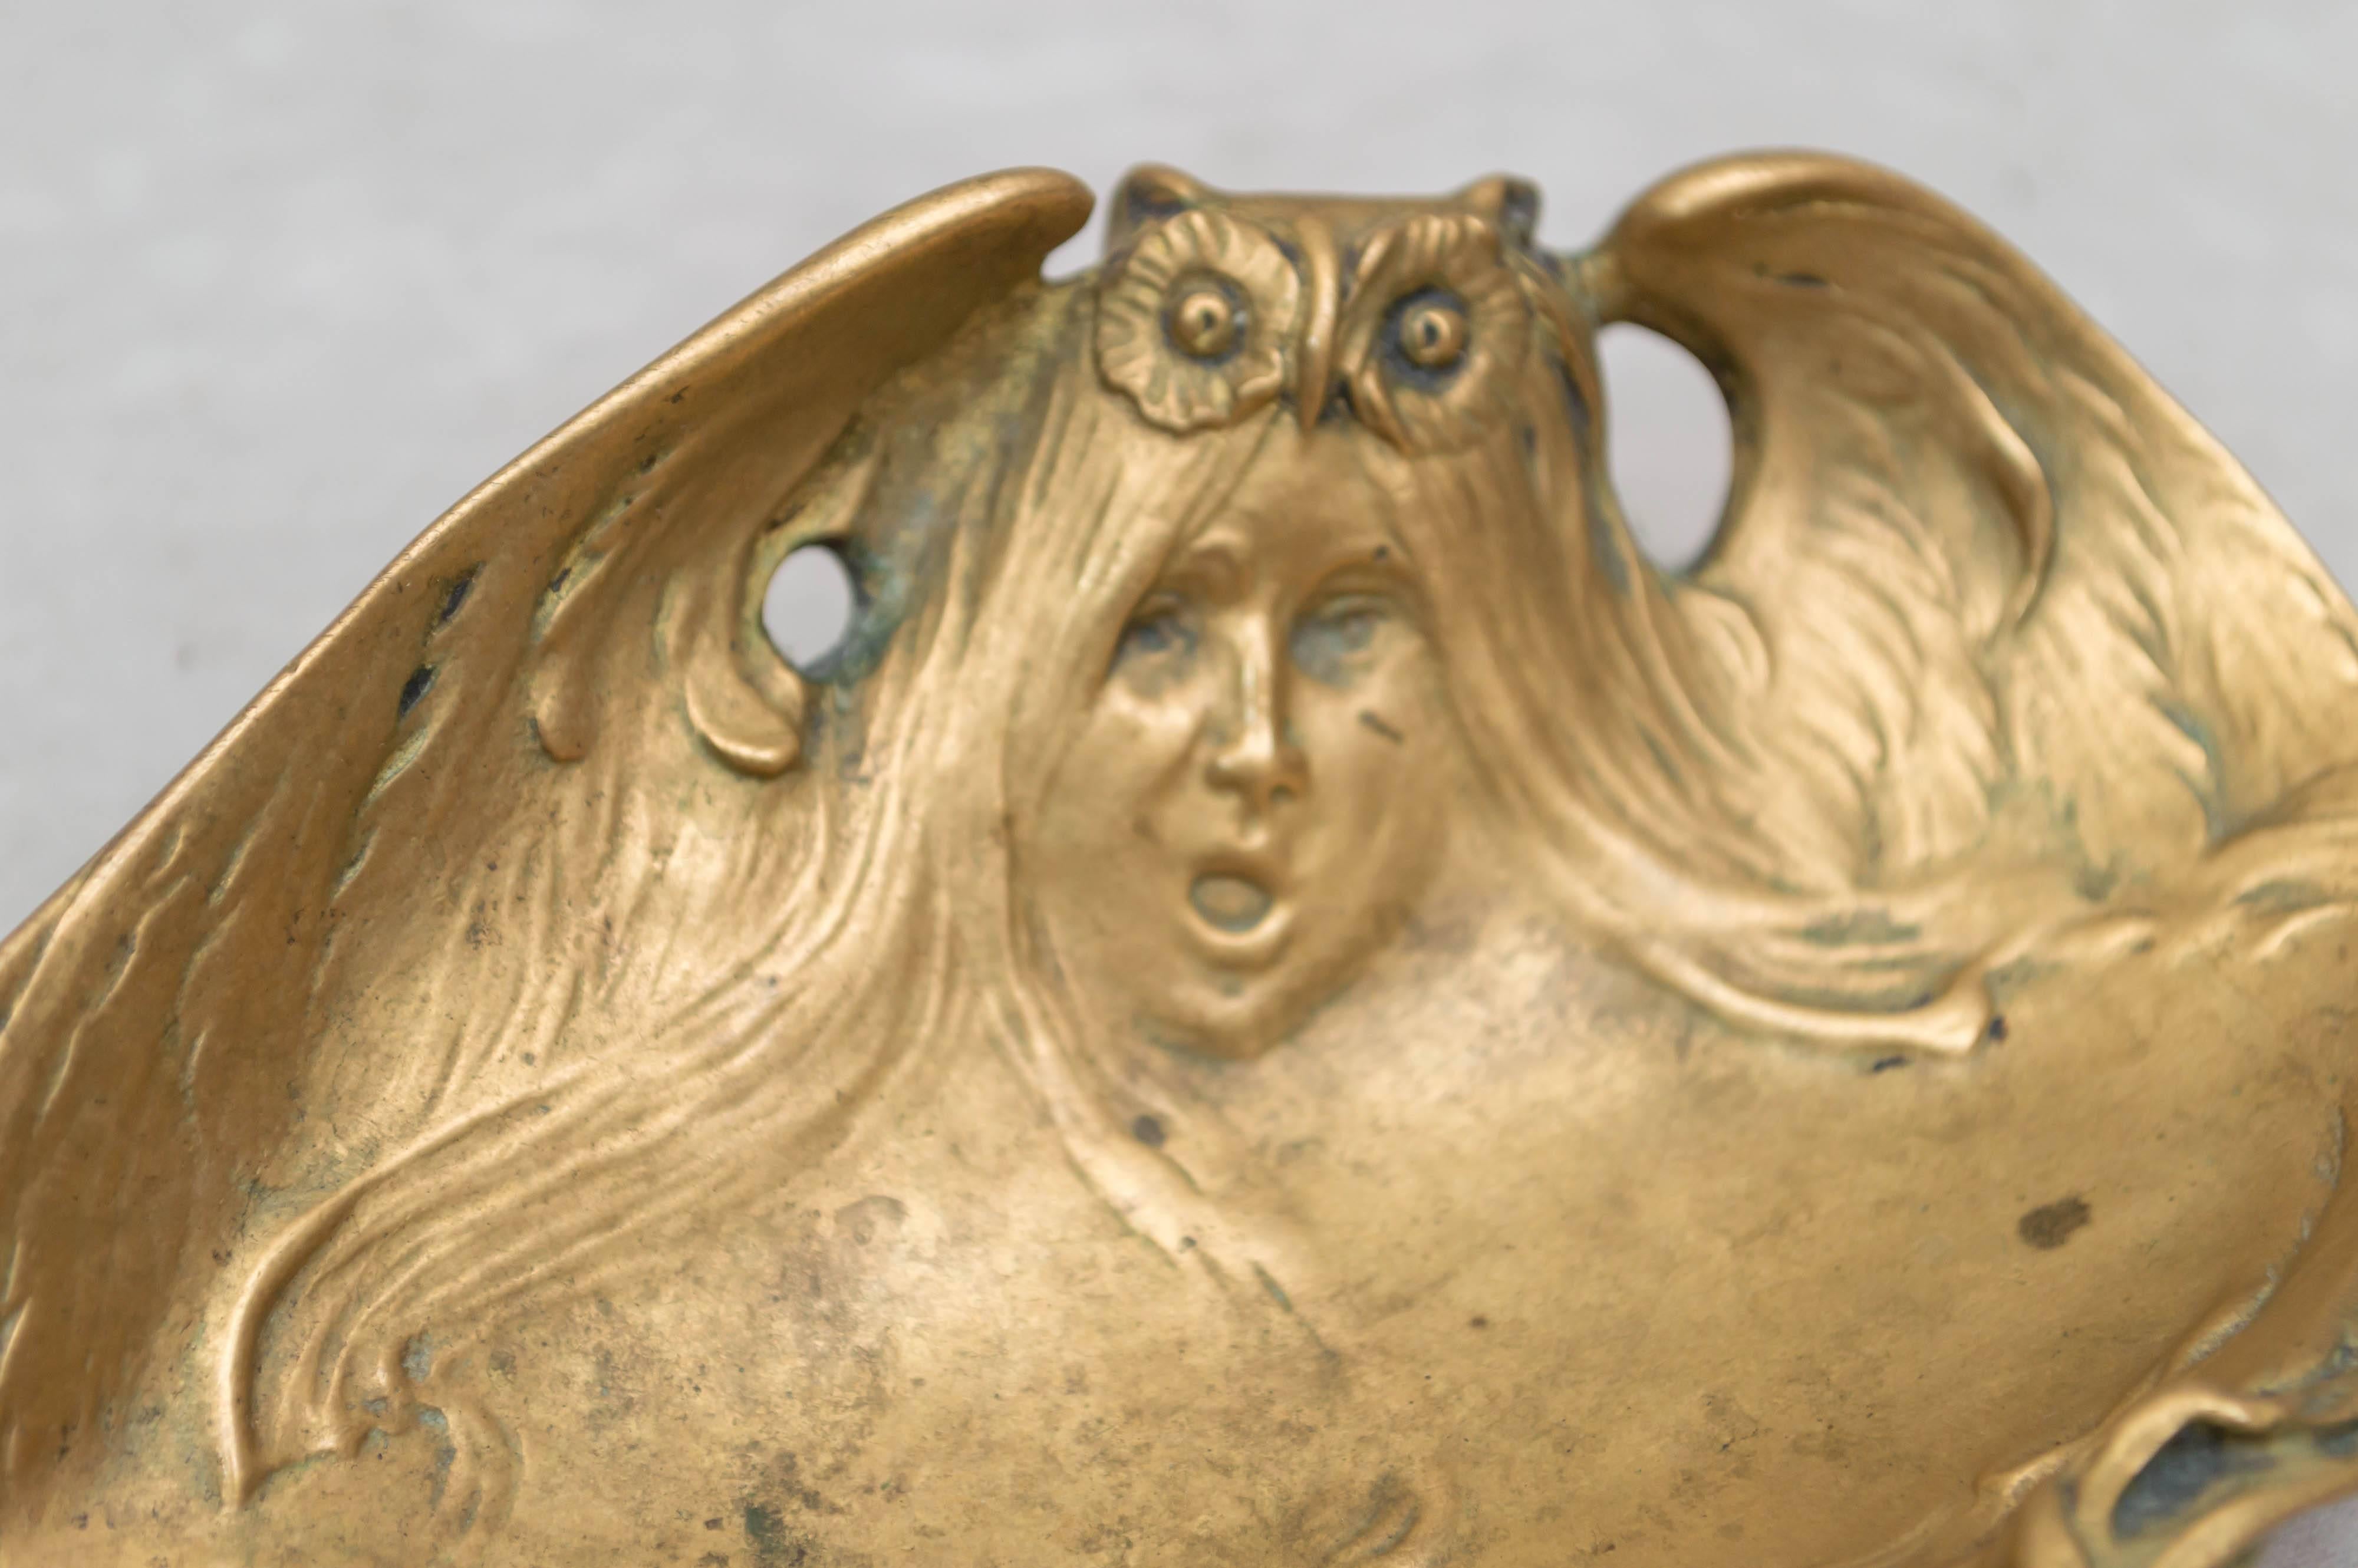 Early 20th Century French Art Nouveau Vide Poche Tray with Women, Owl and Critter